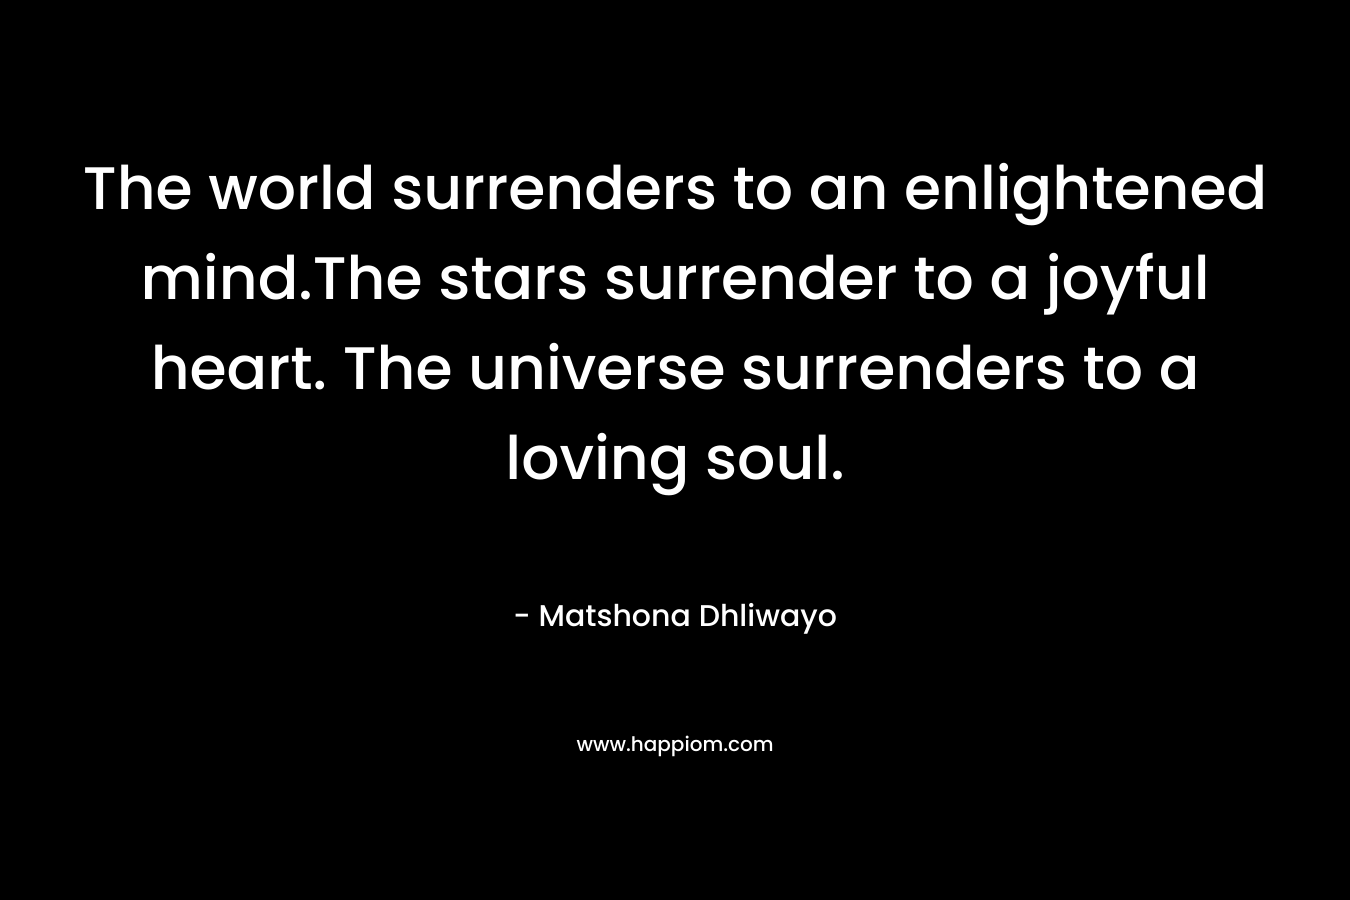 The world surrenders to an enlightened mind.The stars surrender to a joyful heart. The universe surrenders to a loving soul. – Matshona Dhliwayo